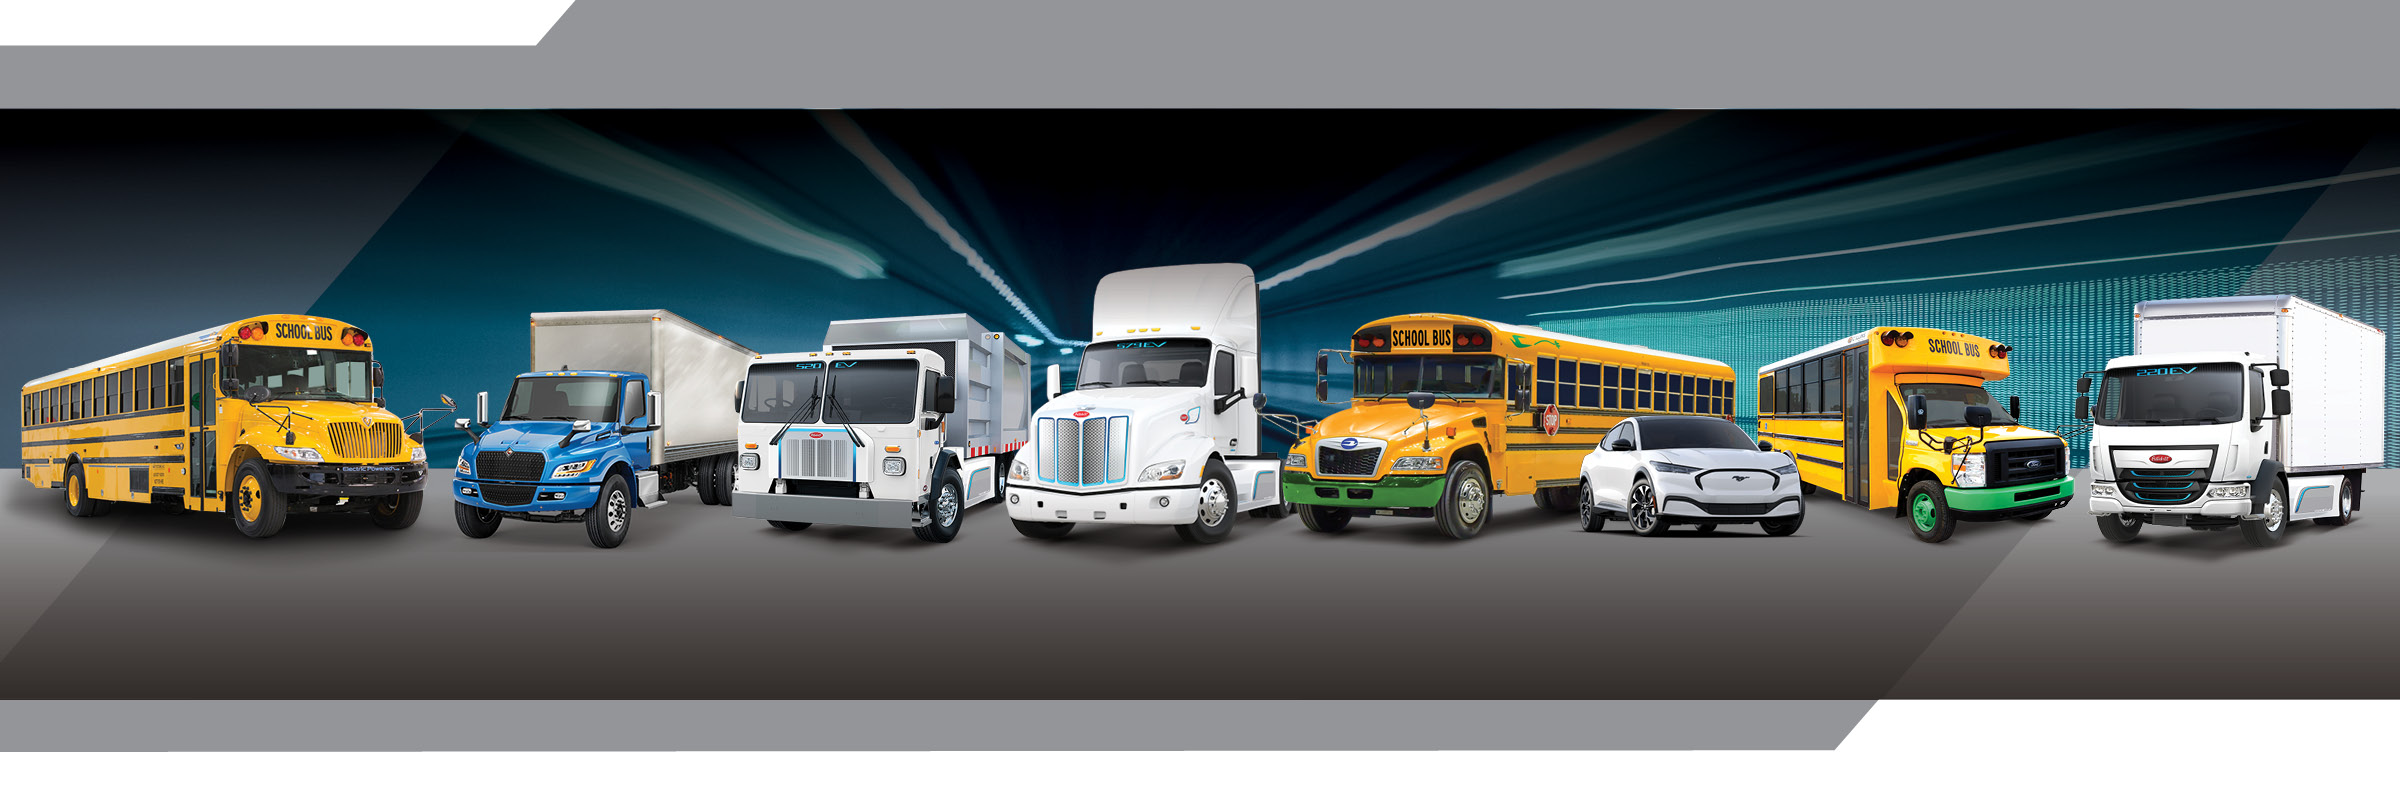 Lineup of electric trucks, electric buses and other electric vehicles